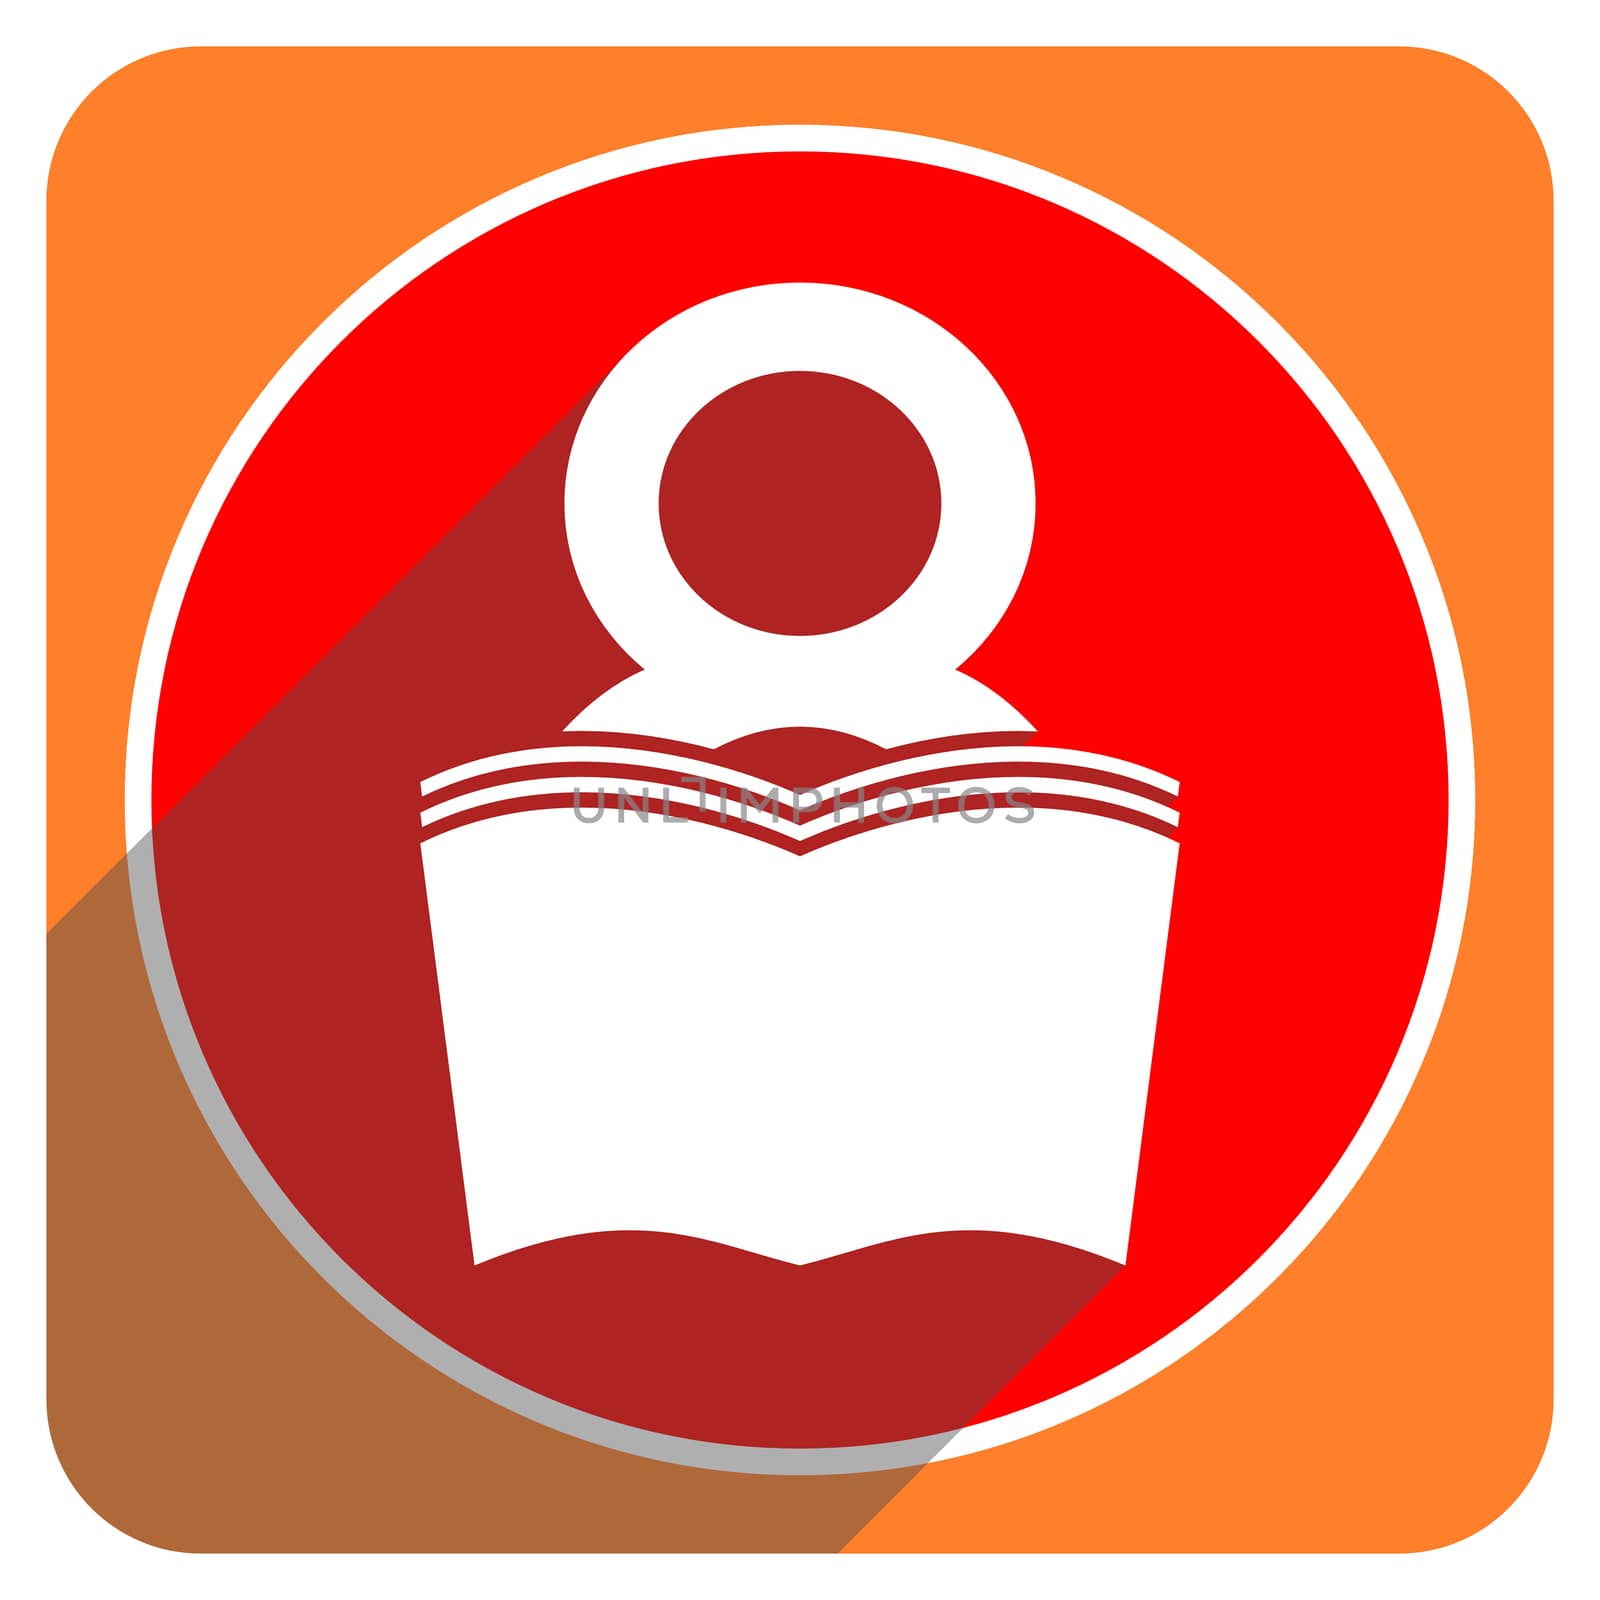 book red flat icon isolated